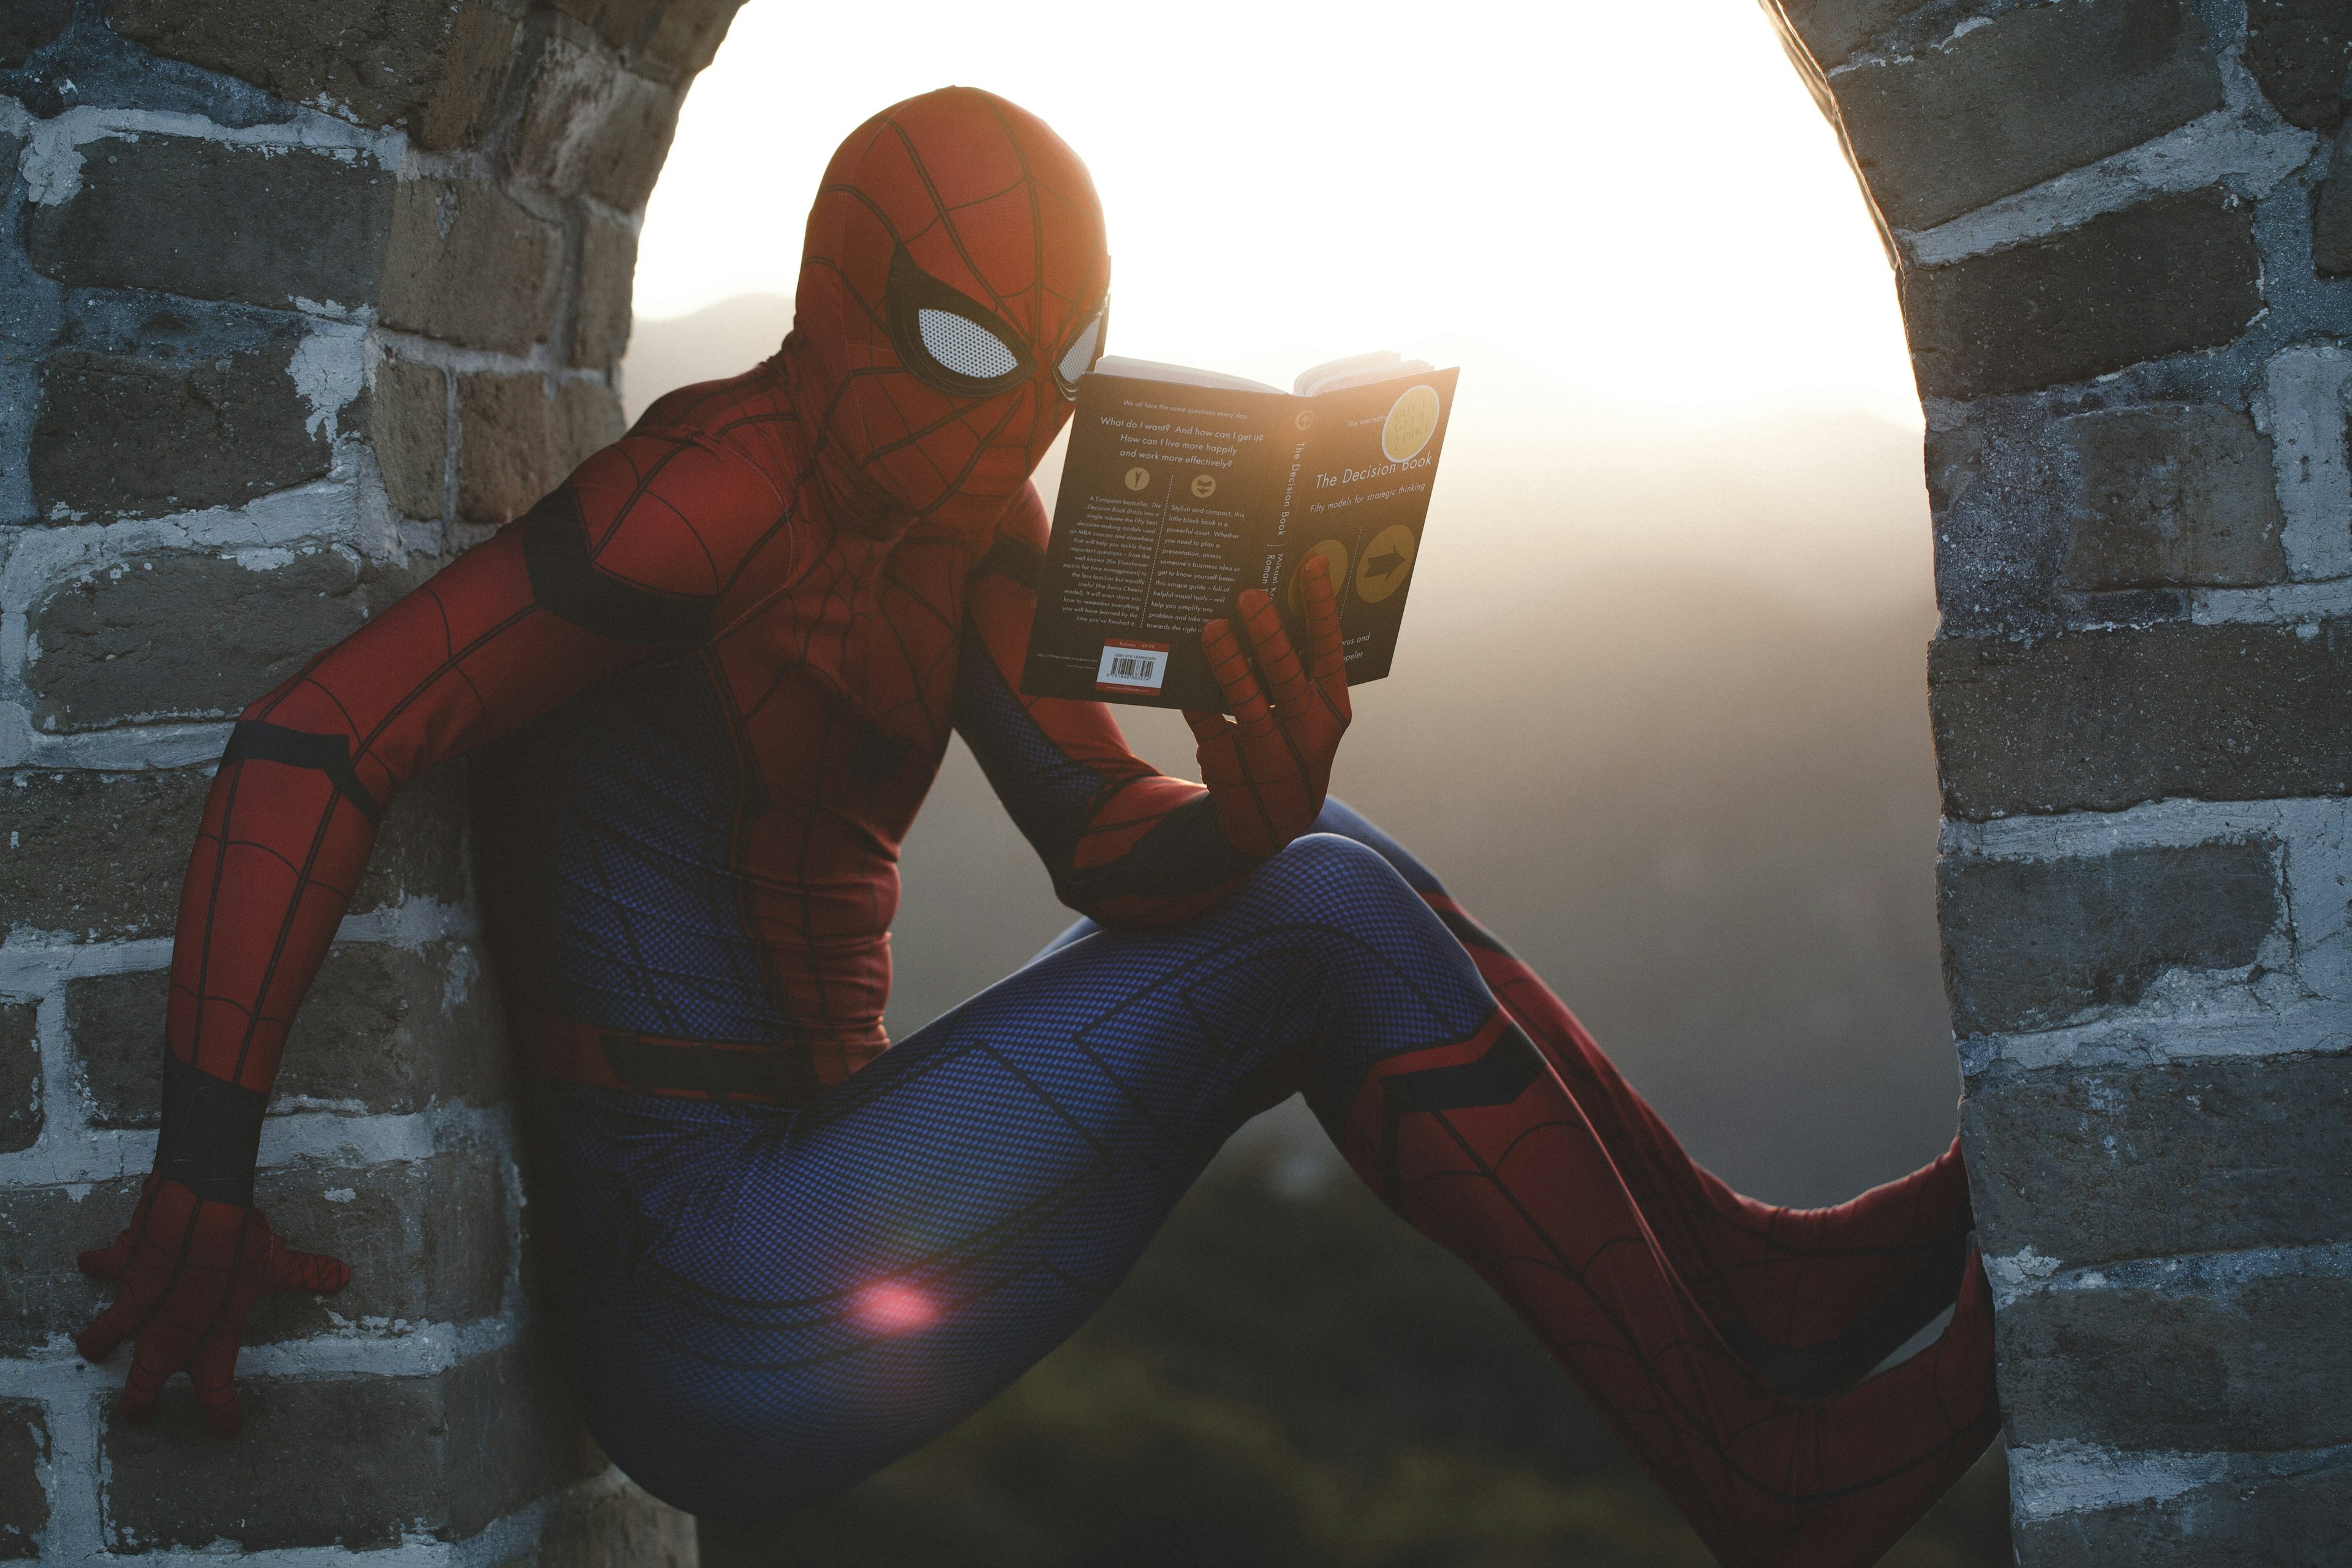 A person wearing a Spiderman costume sits in an open window reading a book.